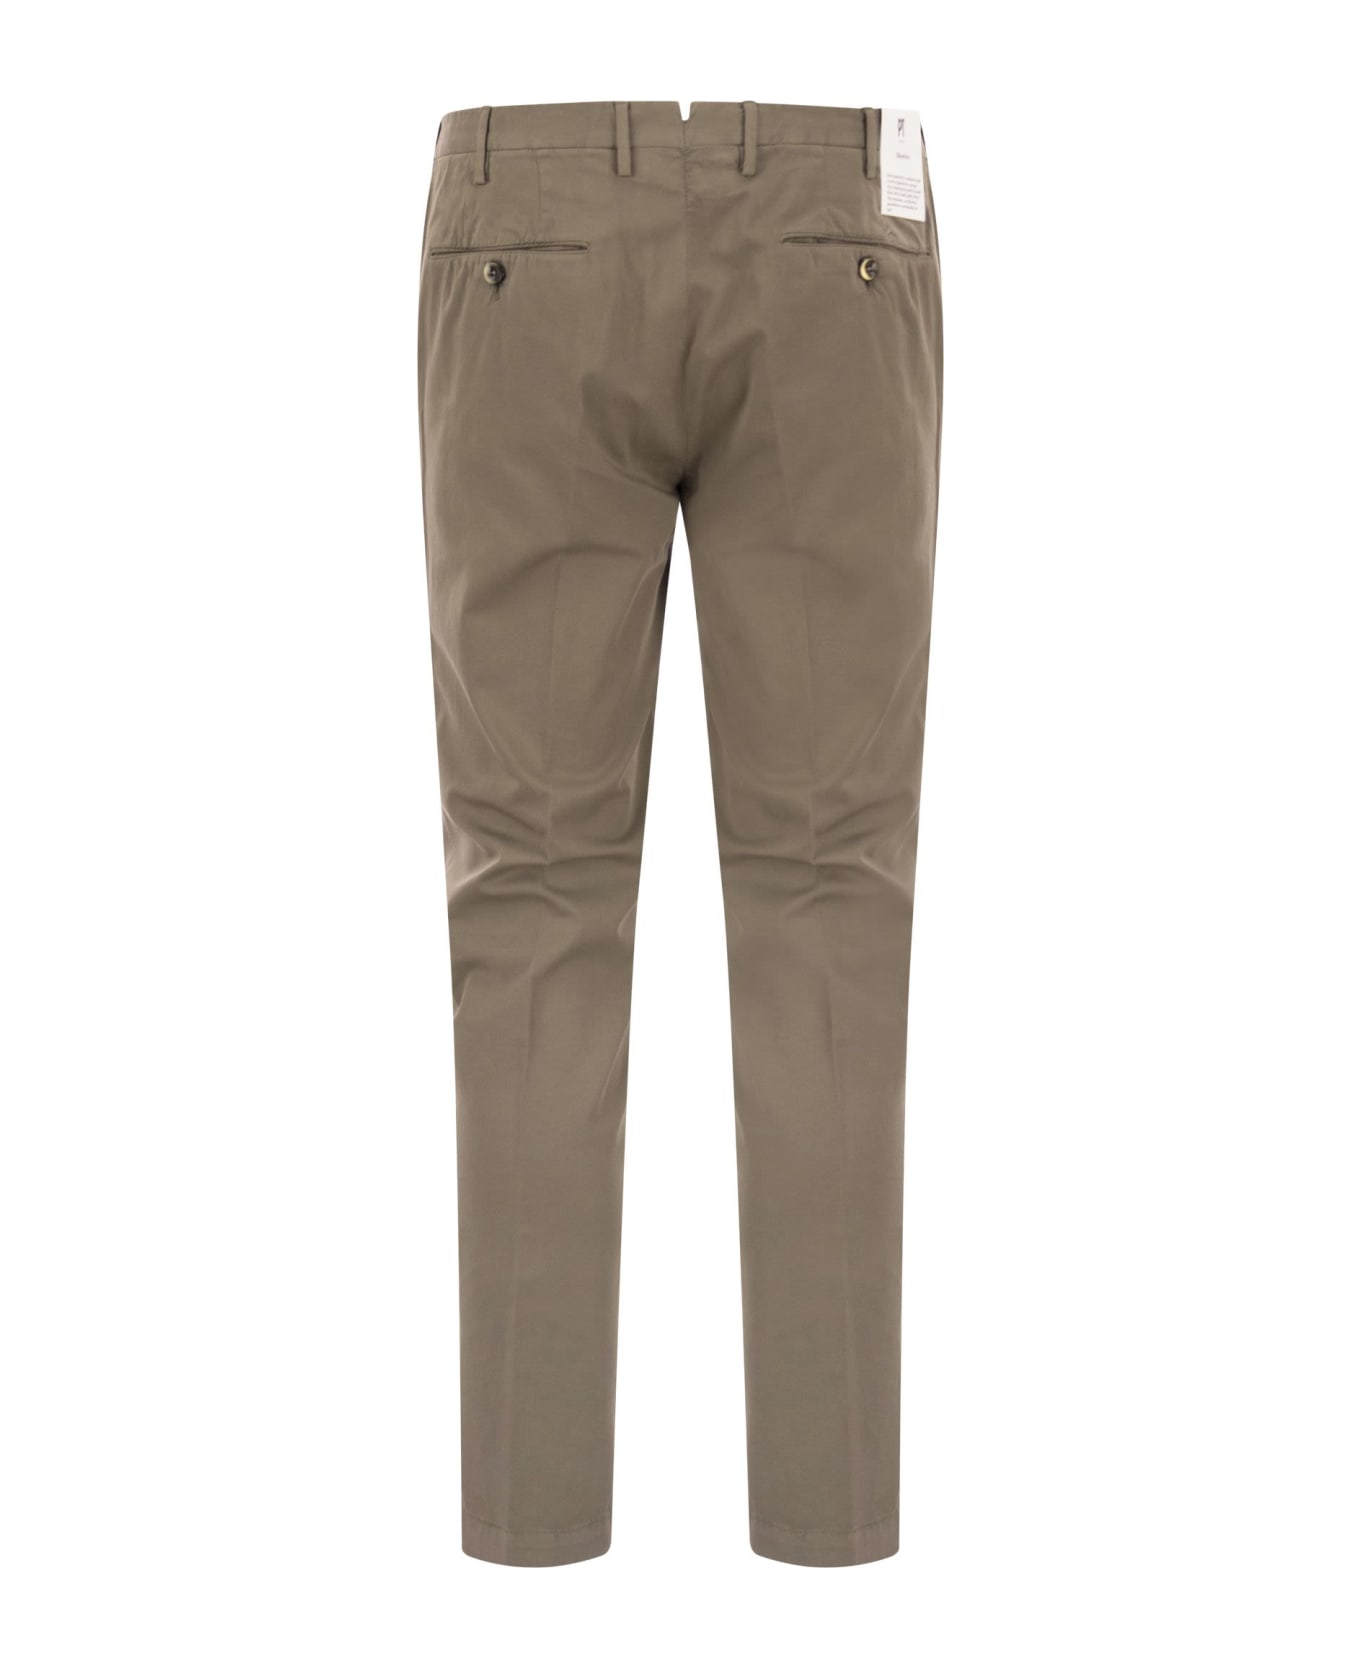 PT Torino Superslim Trousers In Cotton And Silk - Brown ボトムス